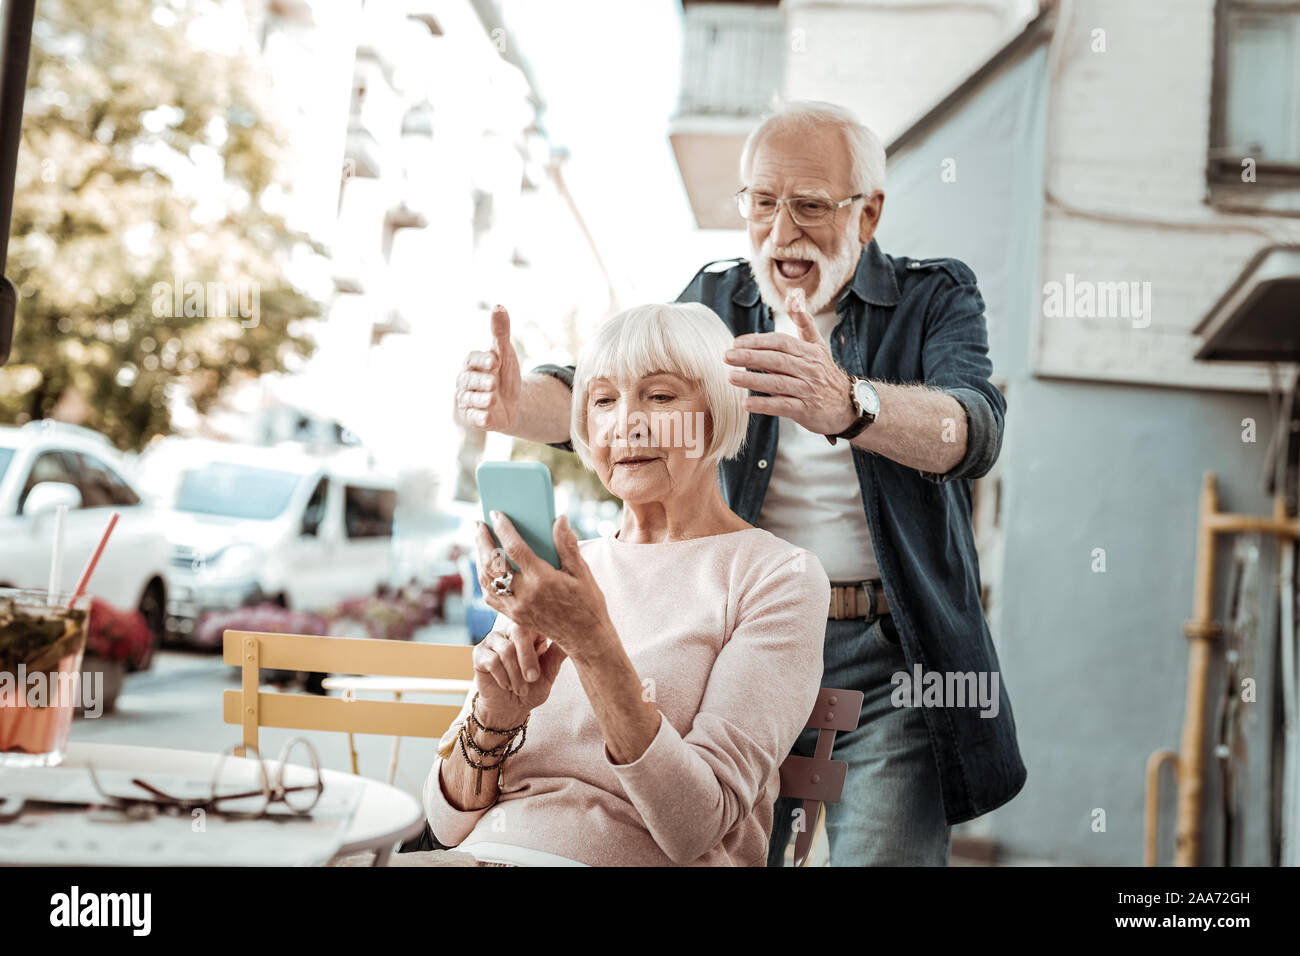 Nice happy aged man standing behind his wife Stock Photo